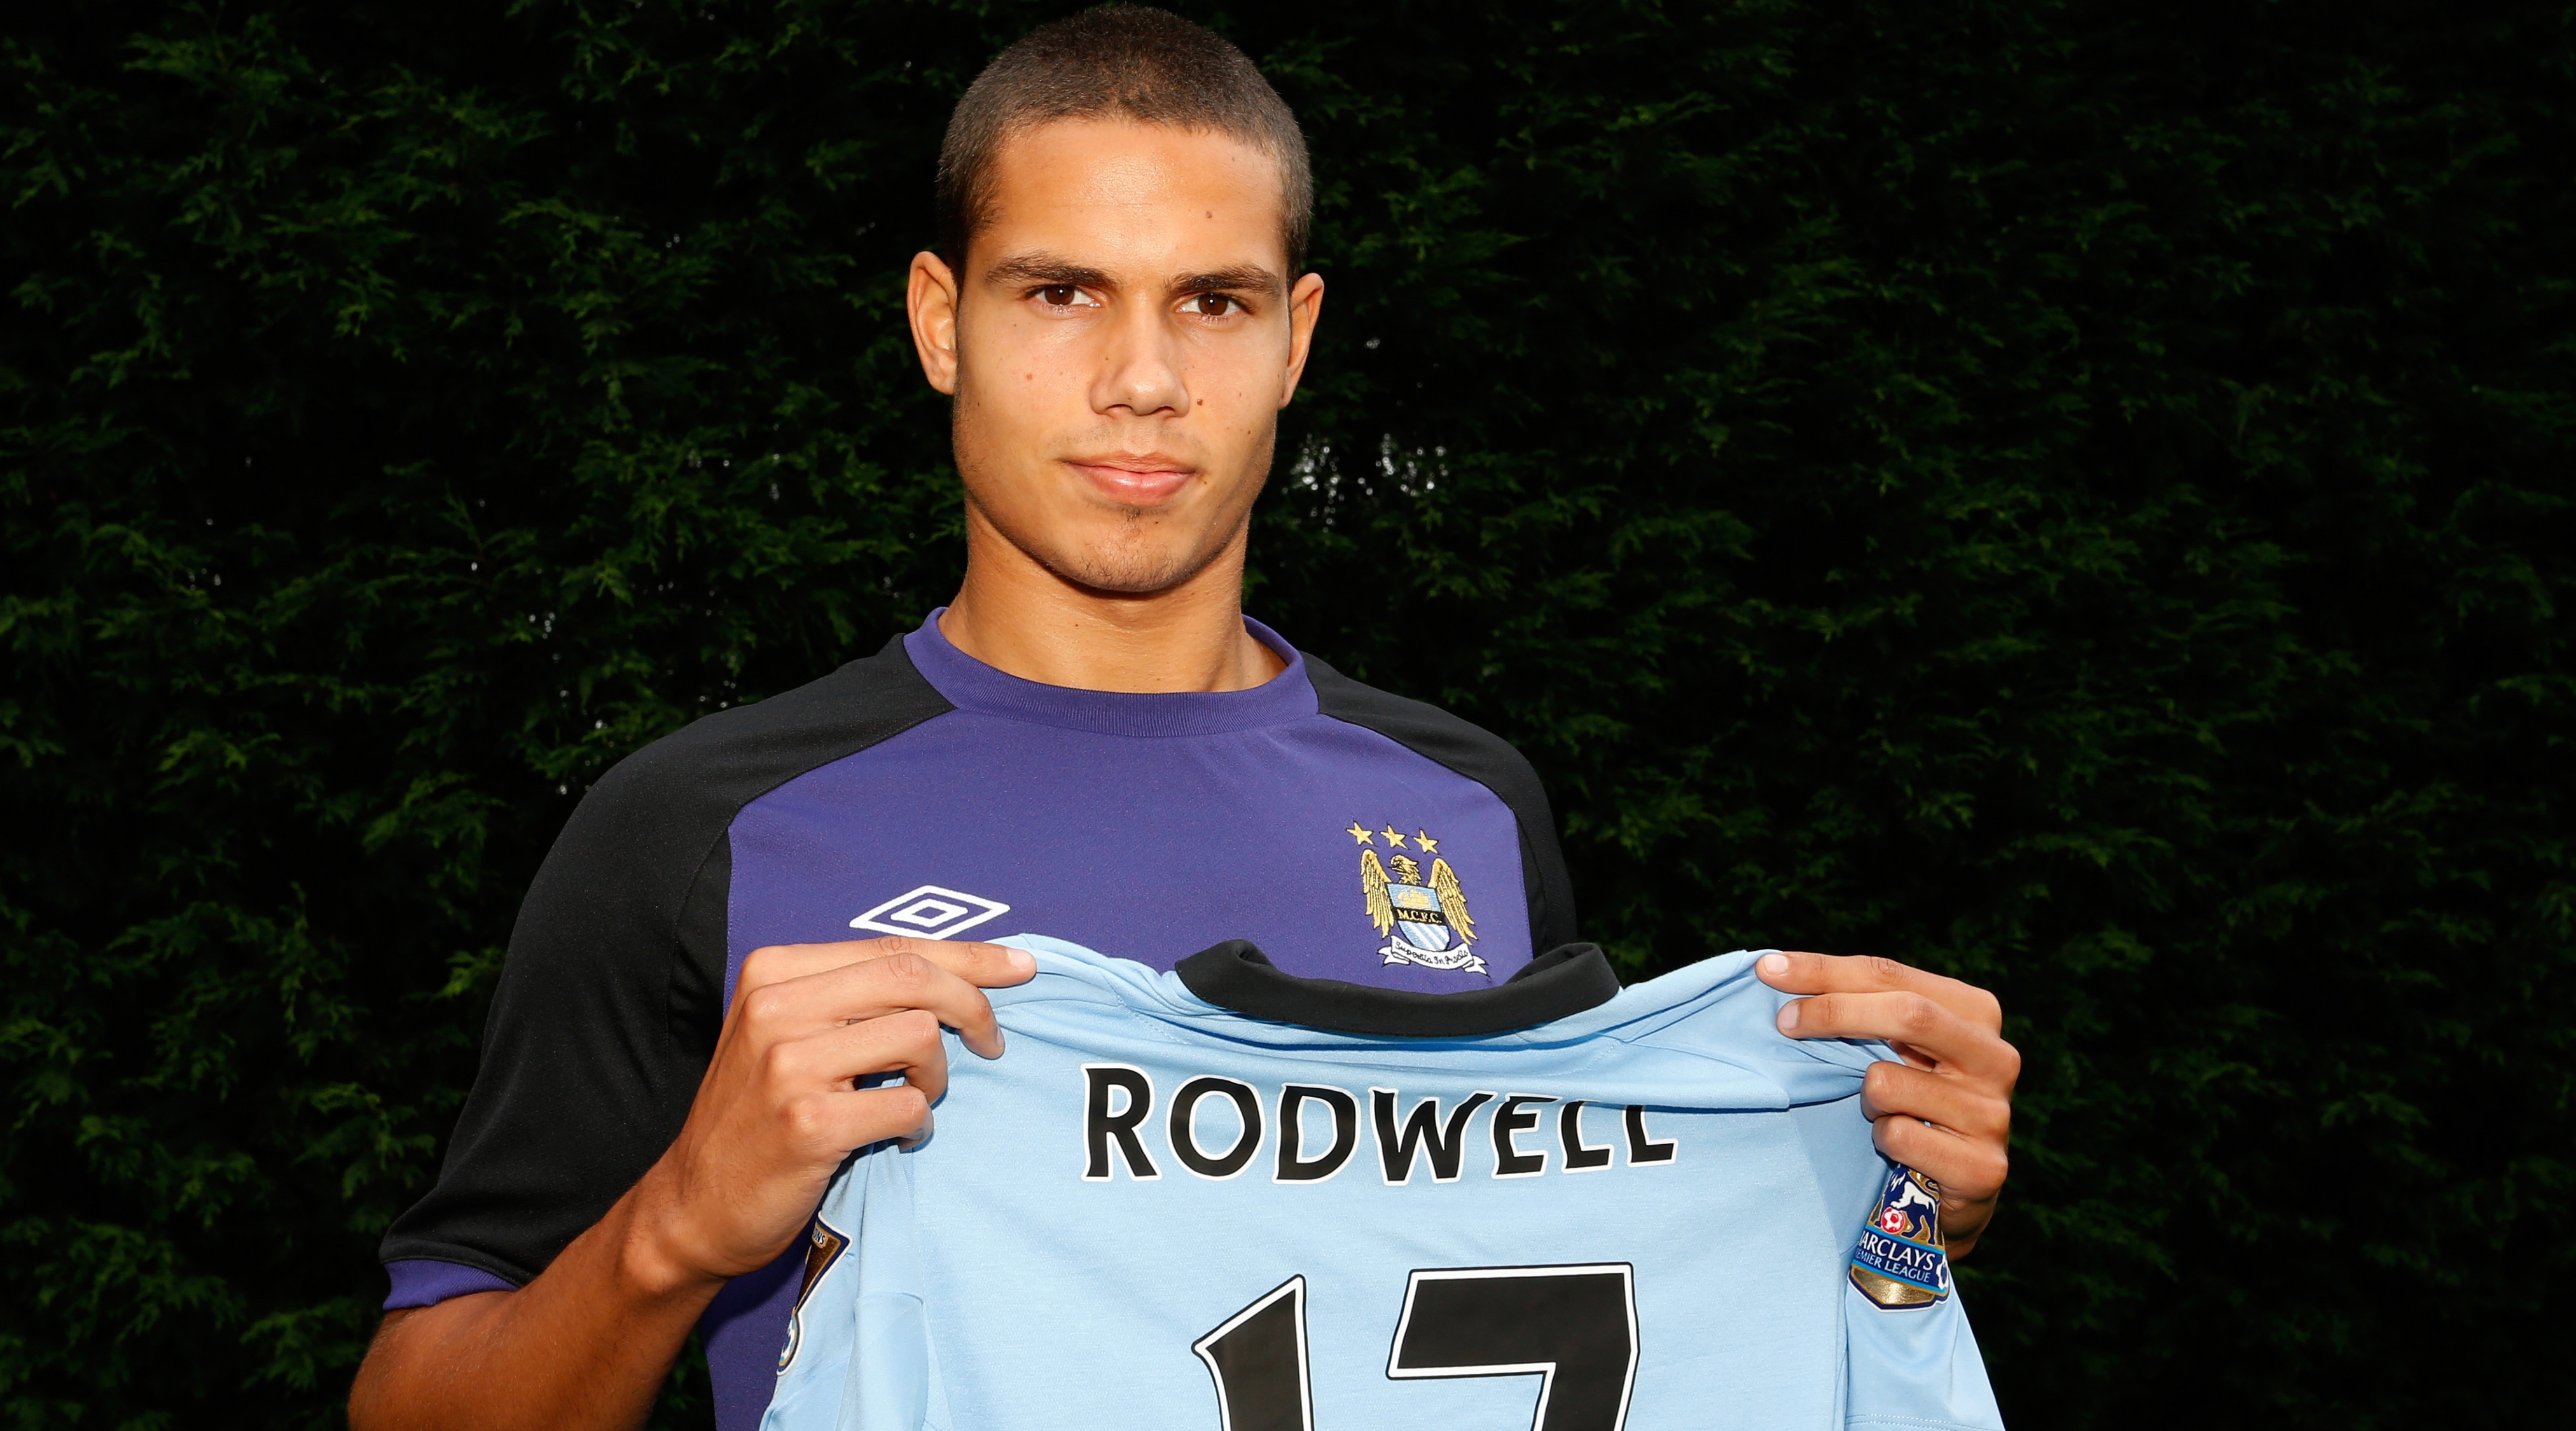 MANCHESTER, ENGLAND - AUGUST 17: New Manchester City player Jack Rodwell poses for a photograph at the MCFC Carrington Training Complex on August 17, 2012 in Manchester, England. (Photo by Paul Thomas/Getty Images)